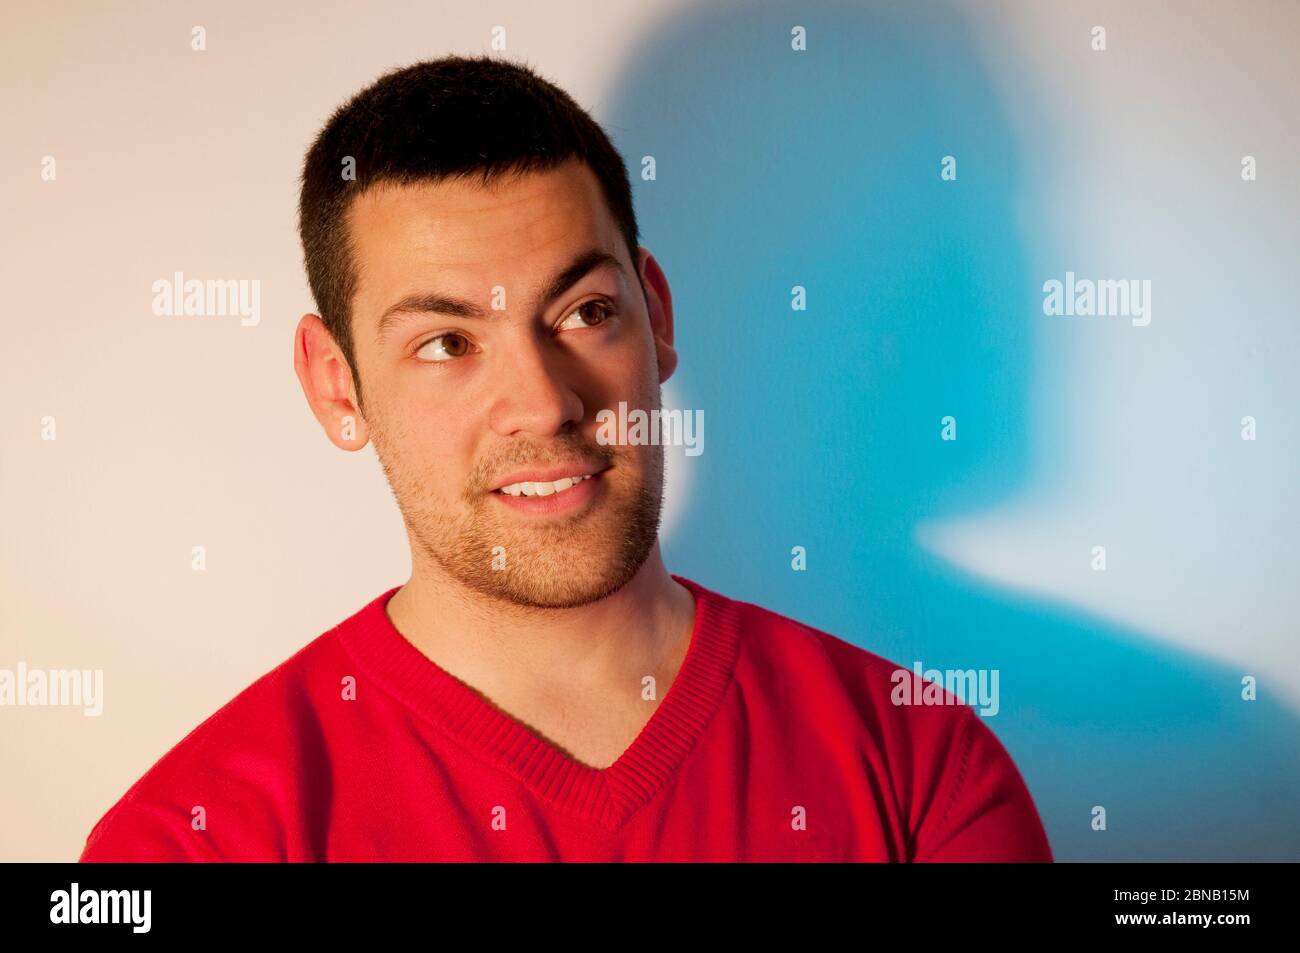 Young man smiling and looking up. Stock Photo